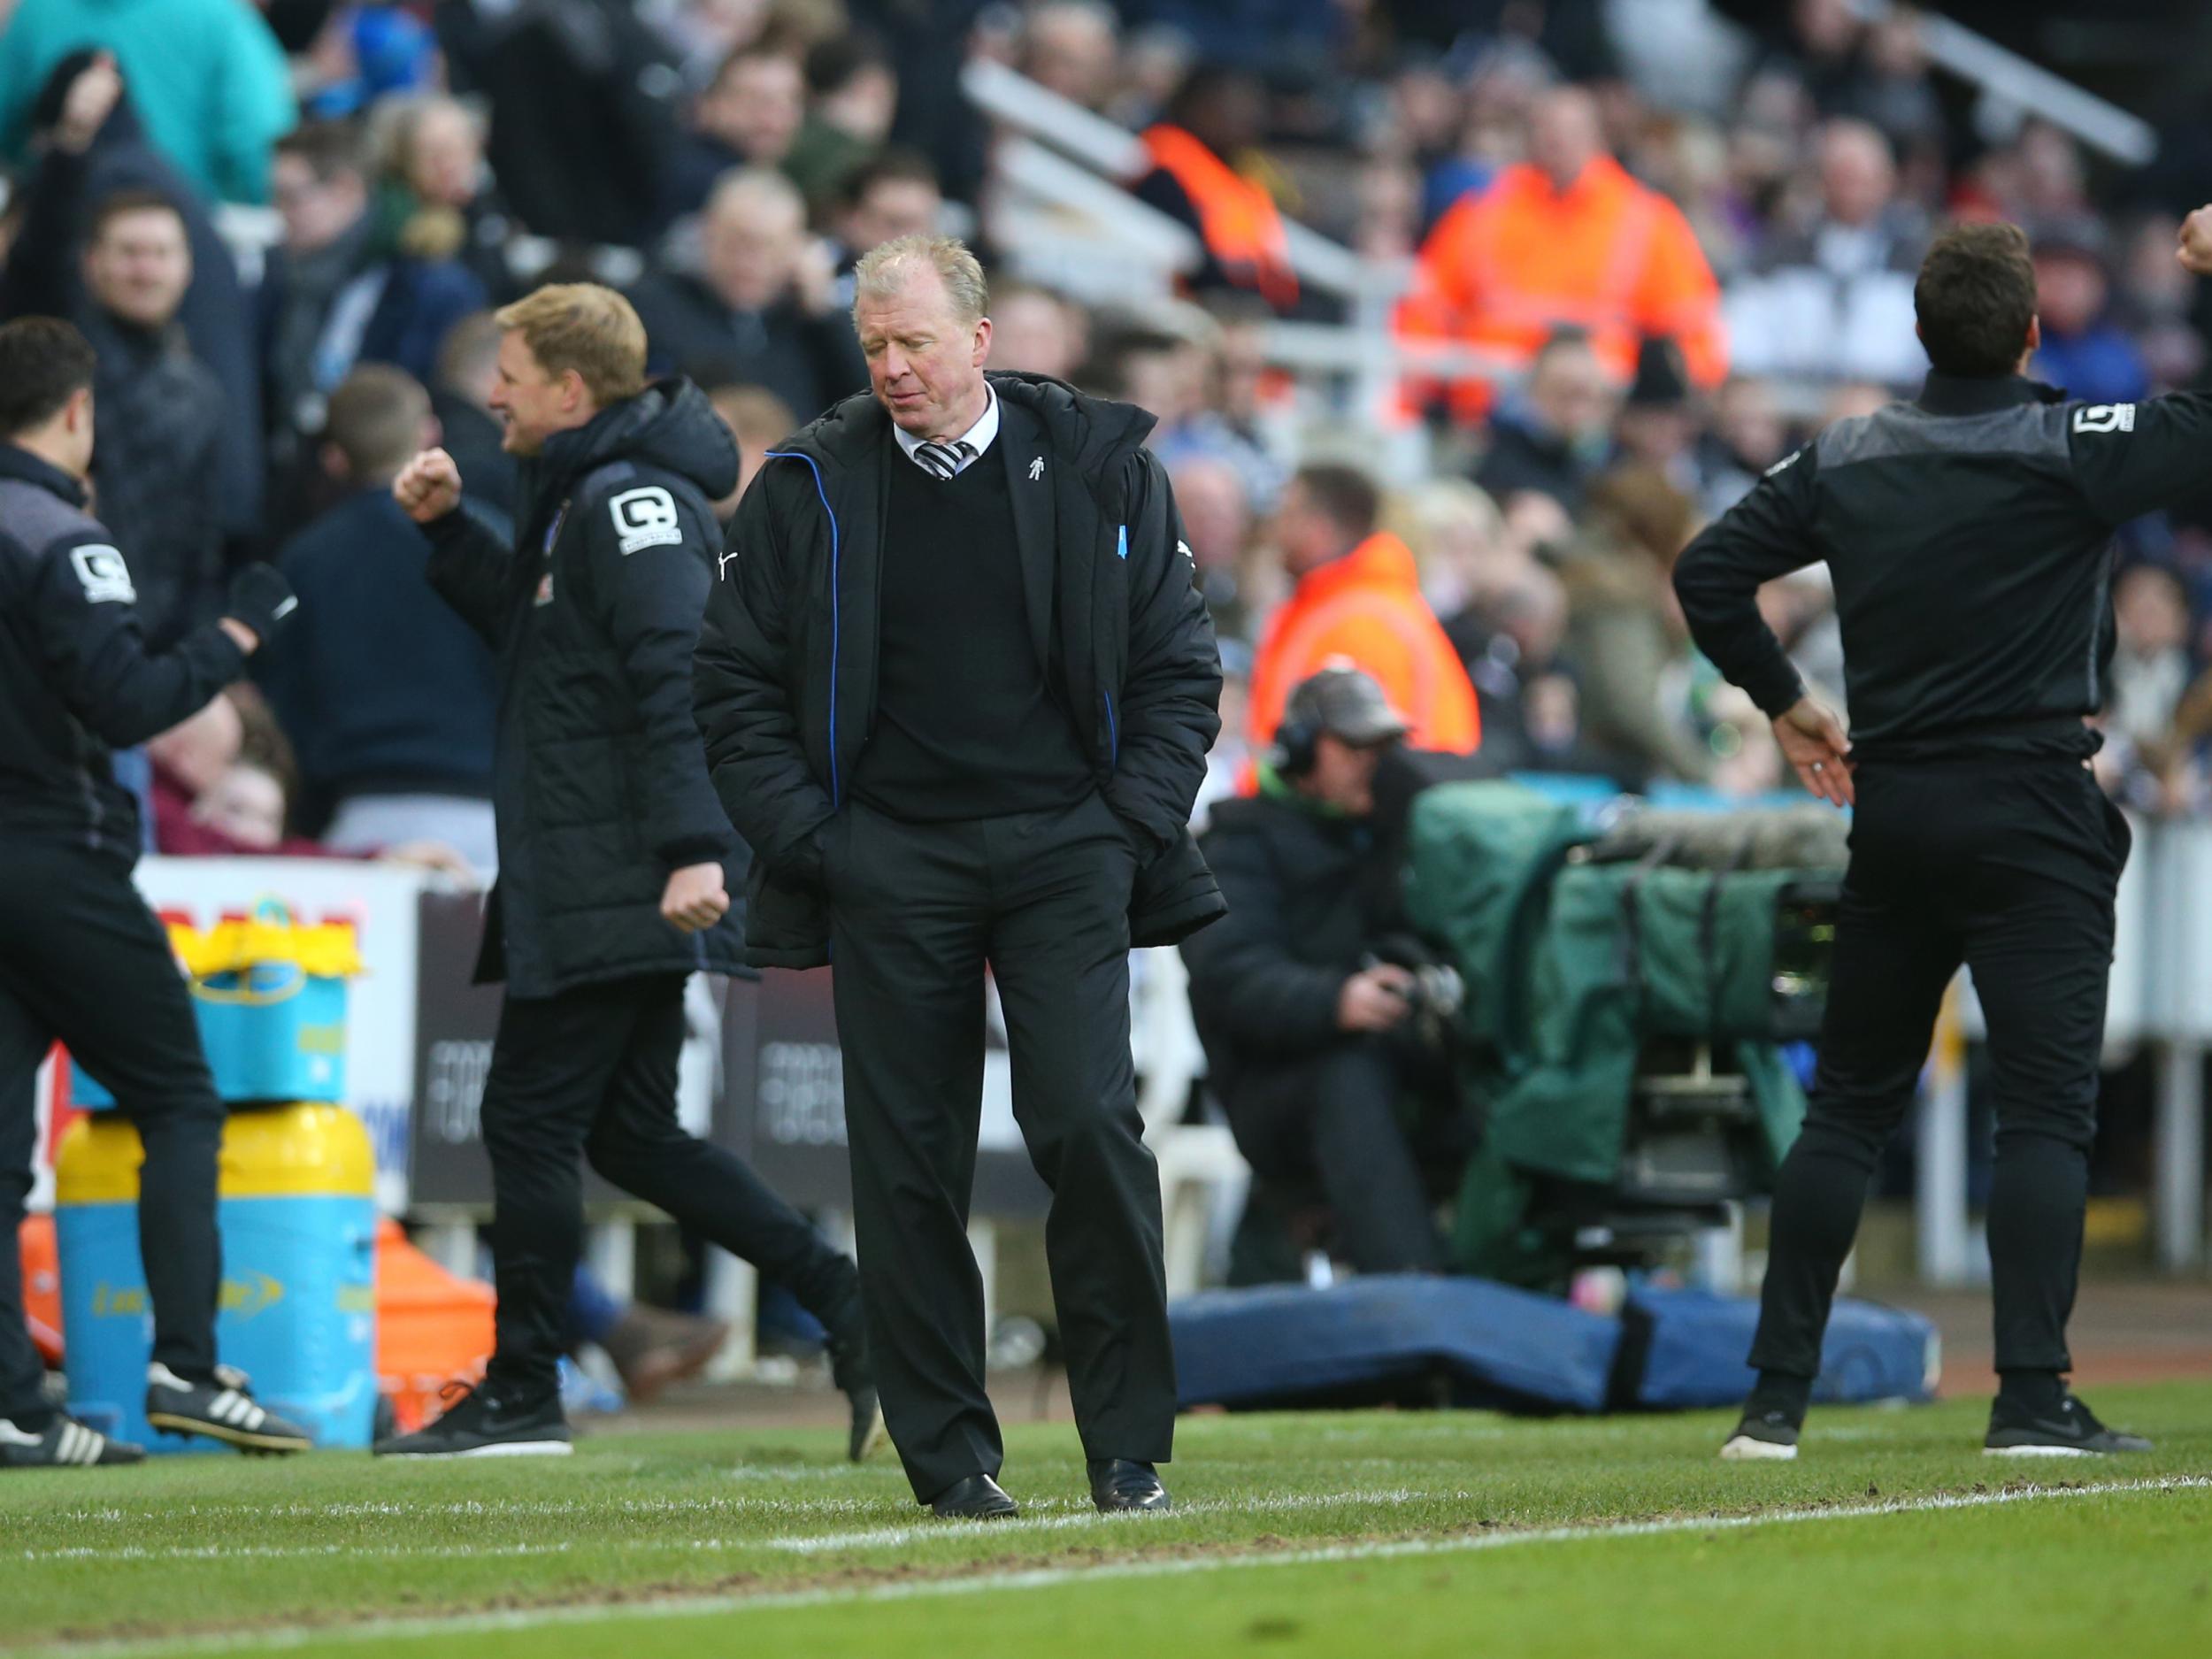 Steve McClaren looks dejected on the St James' Park side-lines after another defeat